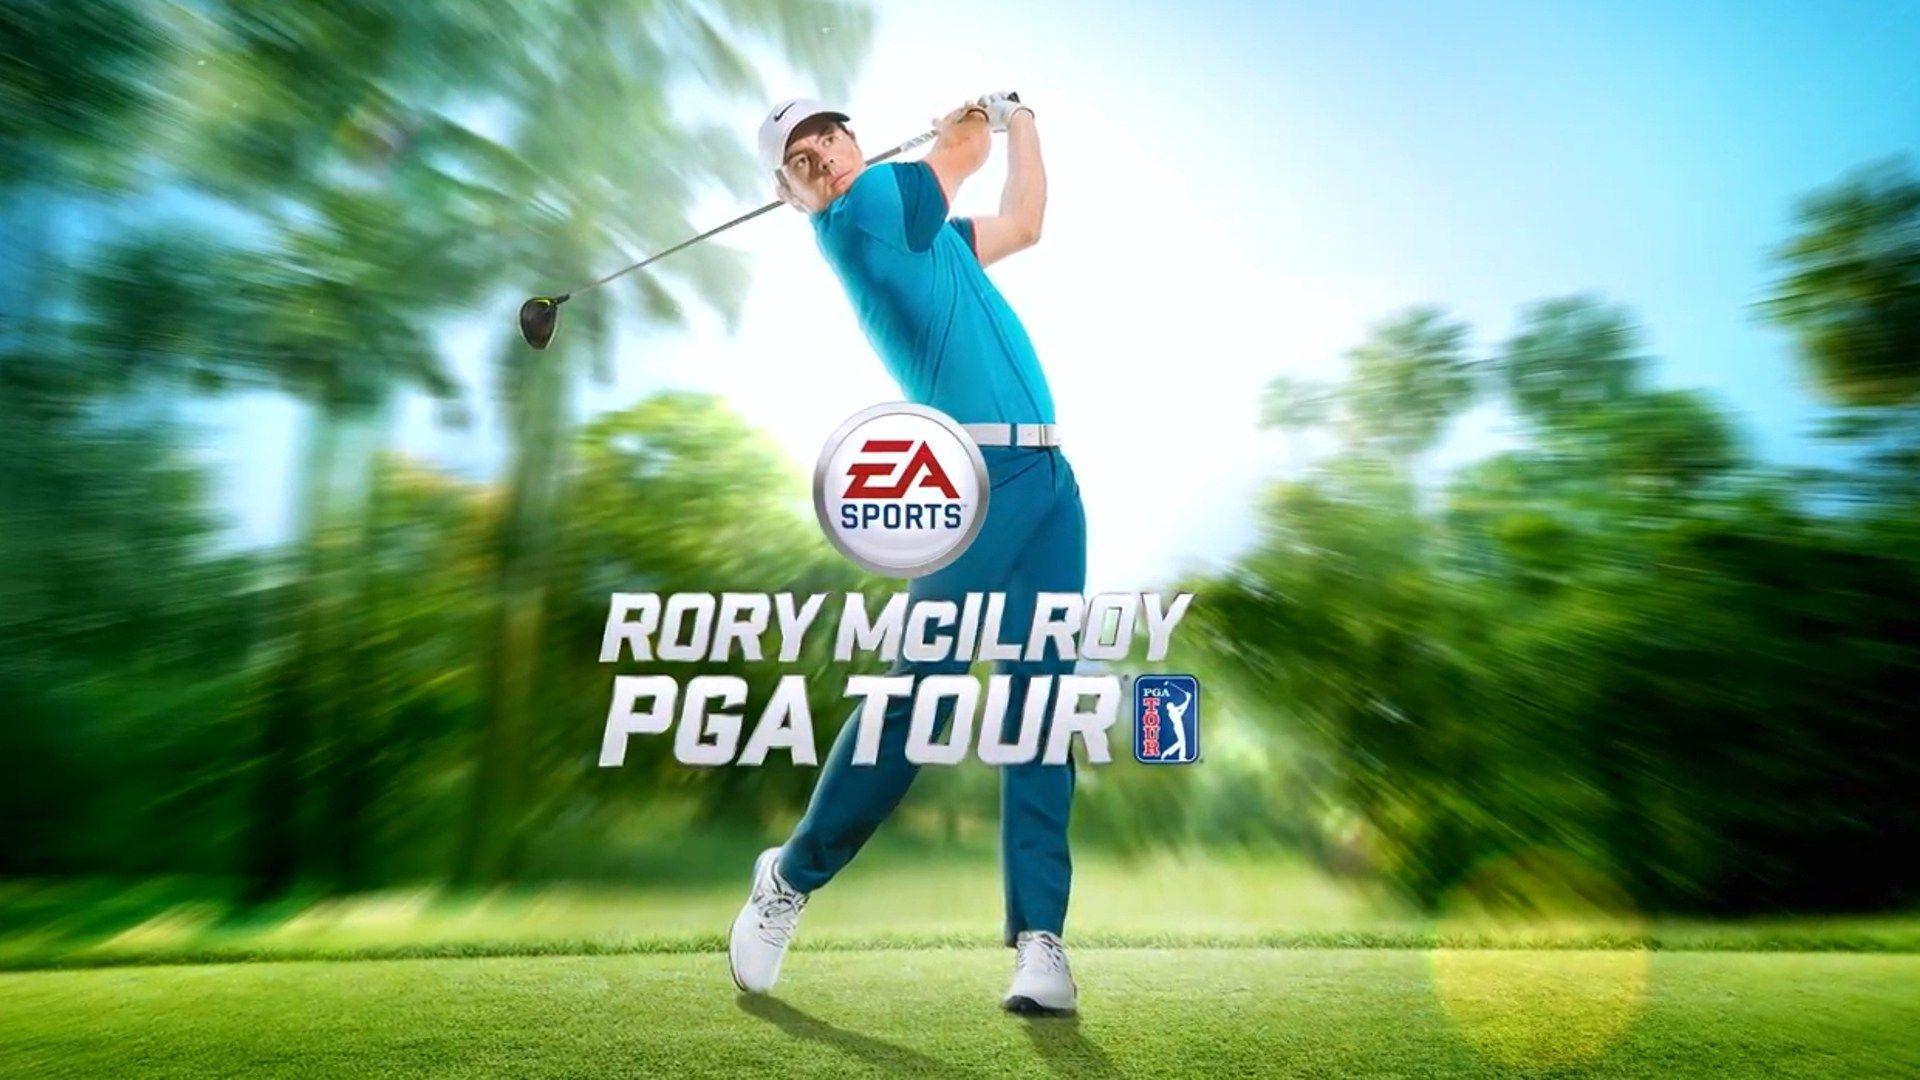 Rory McIlroy PGA Tour Review: A Good First Step